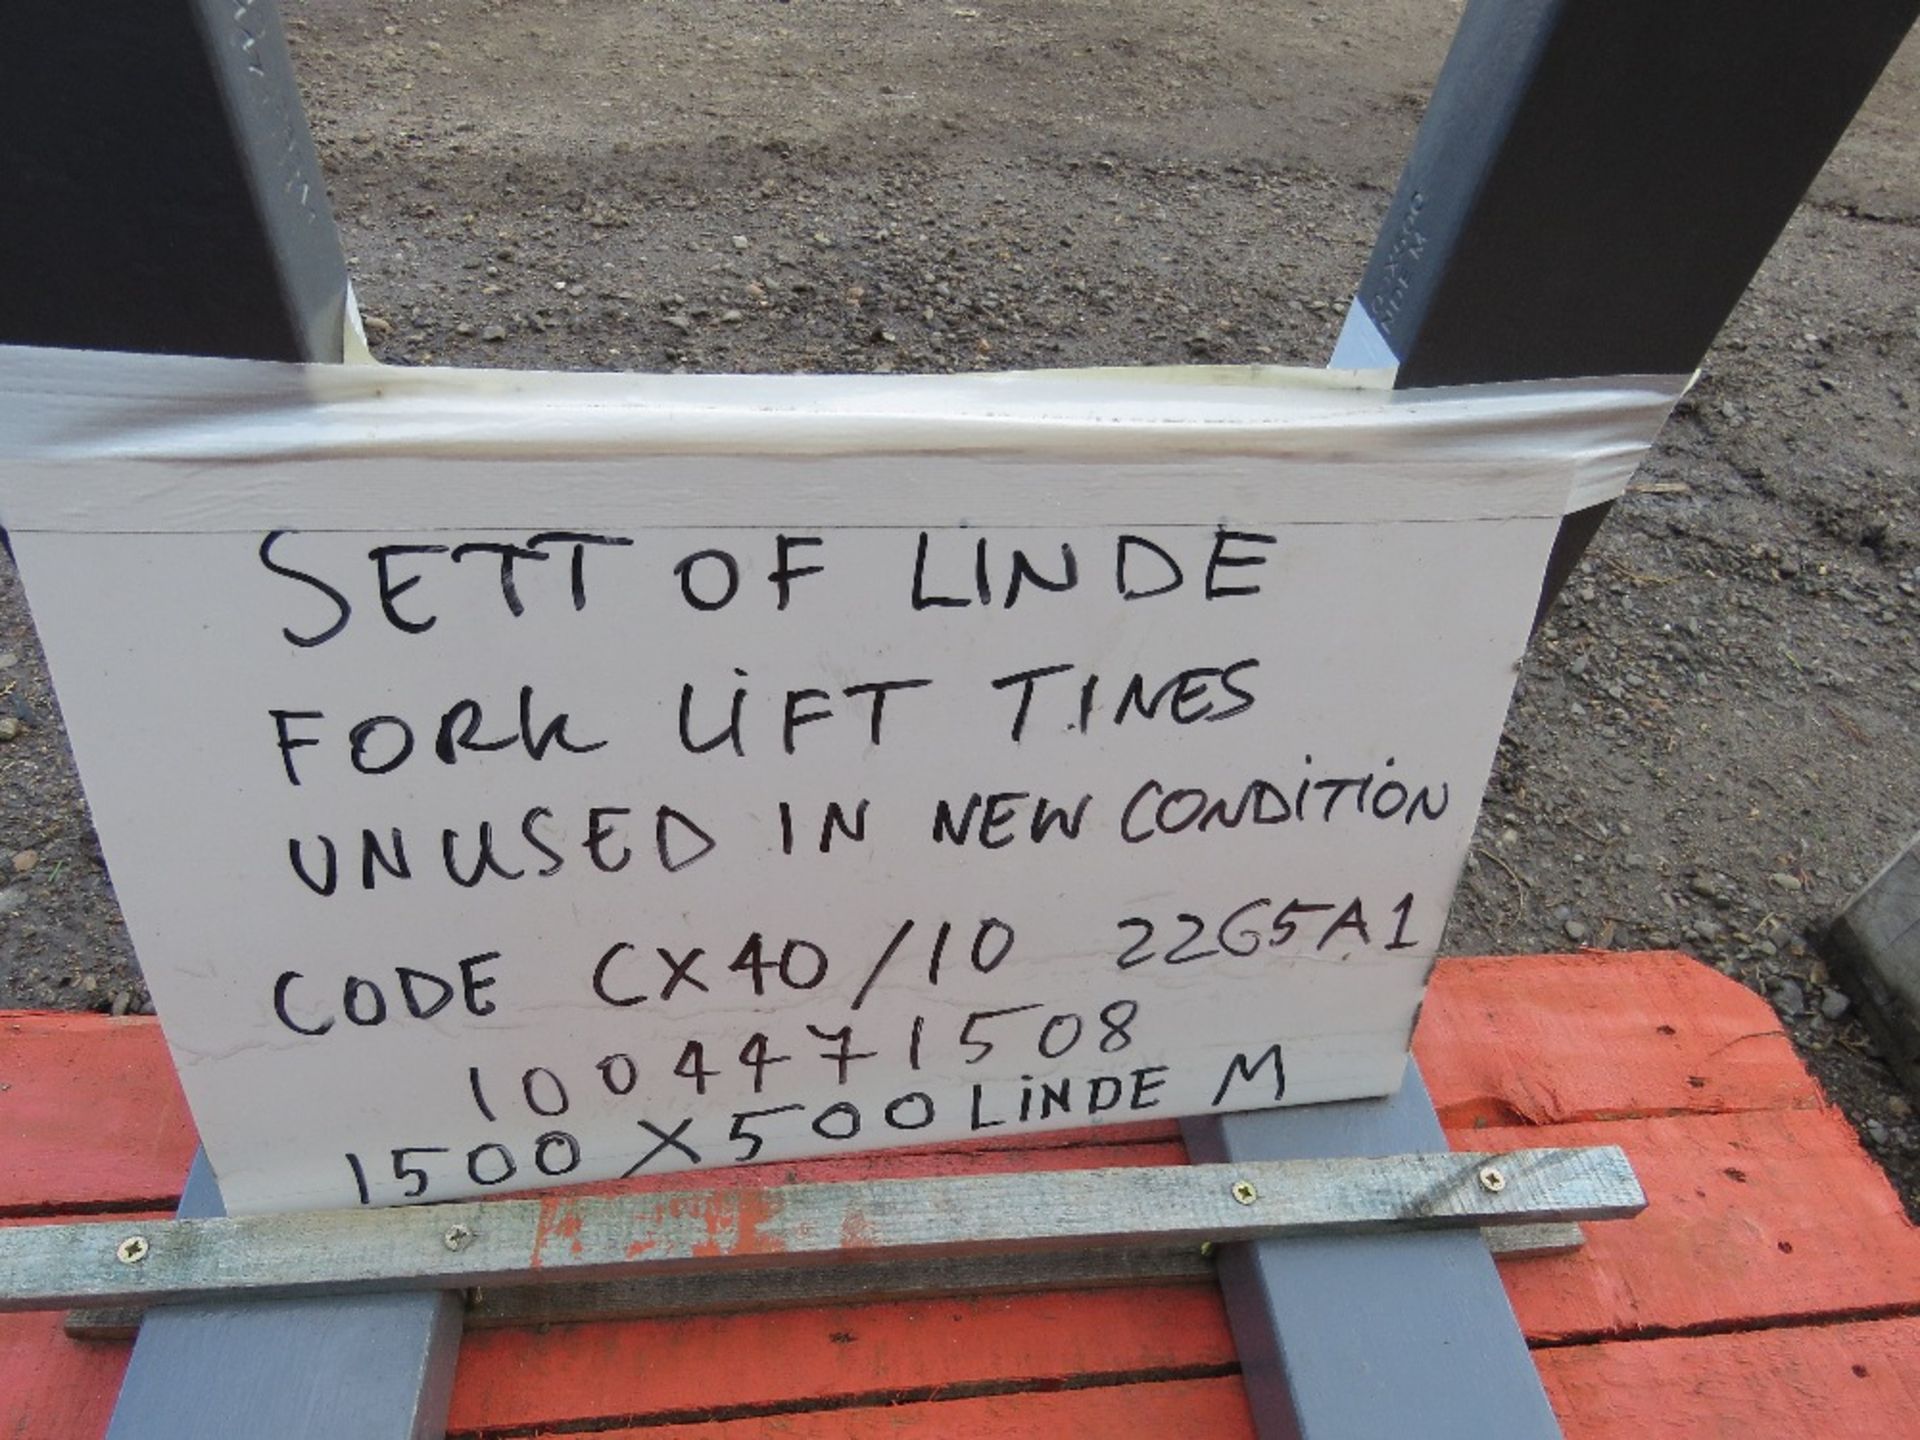 SET OF UNUSED LINDE FORKLIFT TINES 1500 X500 FOR 20" CARRIAGE. ....THIS LOT IS SOLD UNDER THE AUCTIO - Image 4 of 4